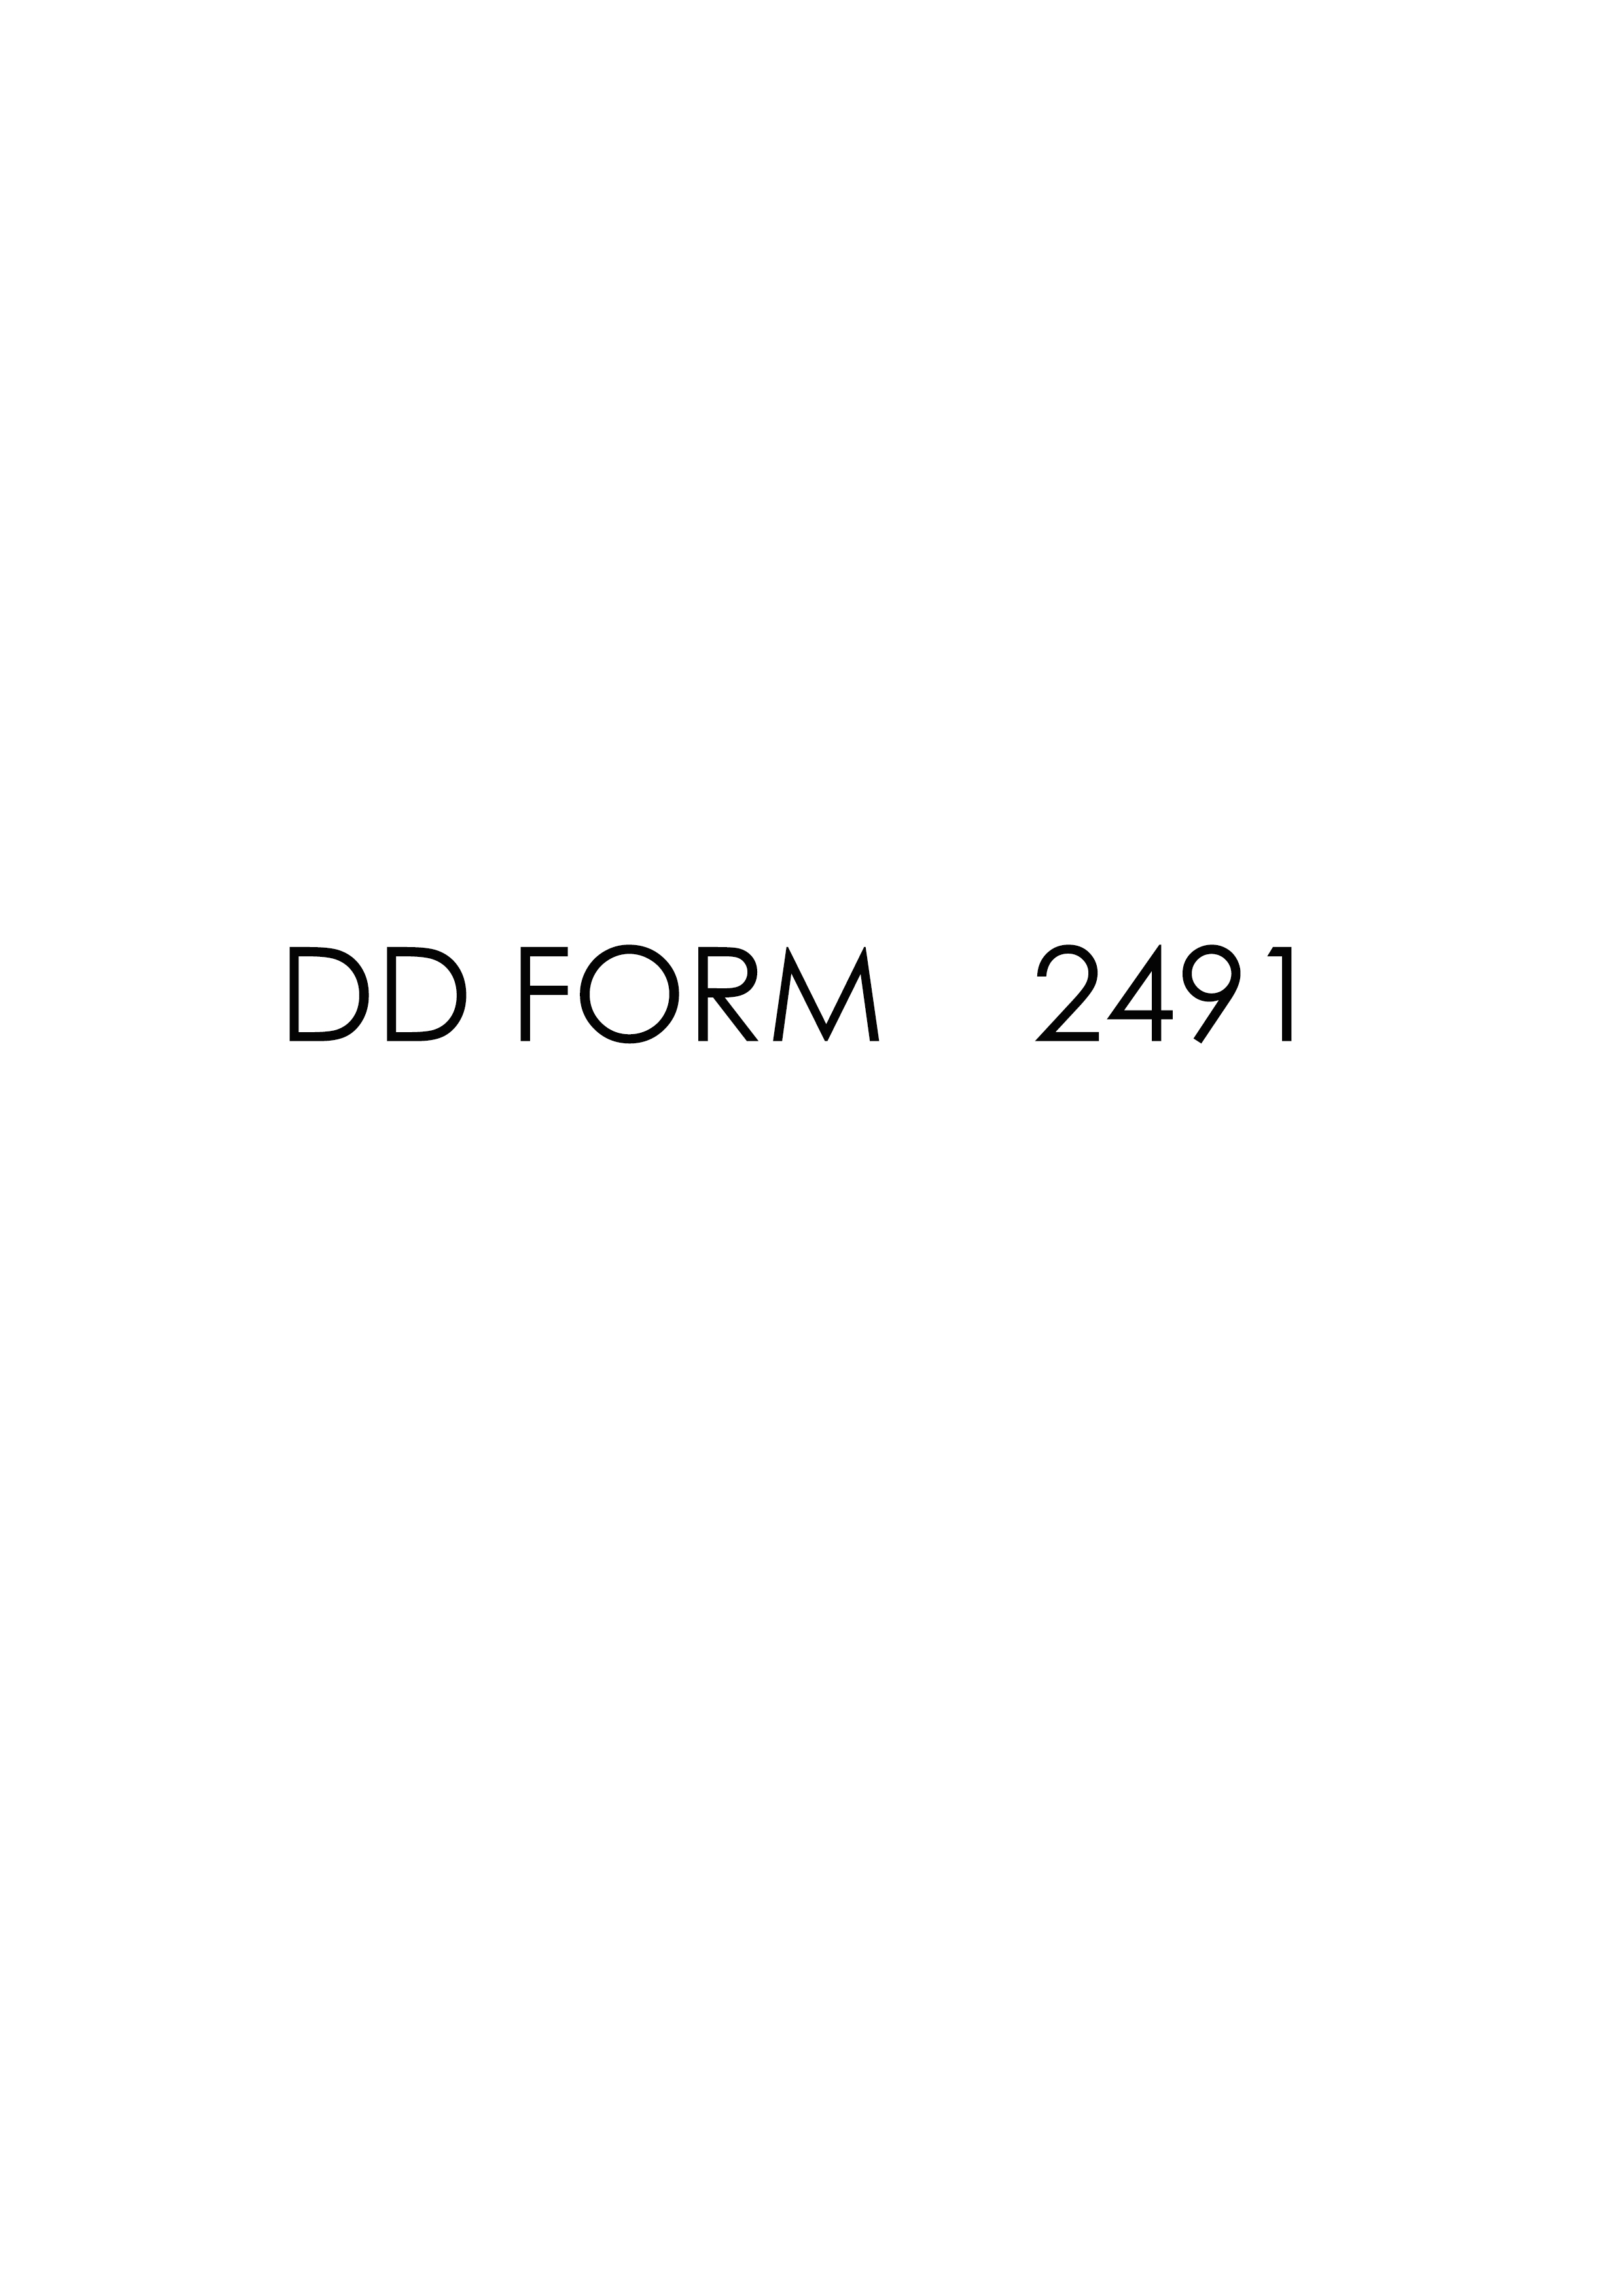 Download Fillable dd Form 2491